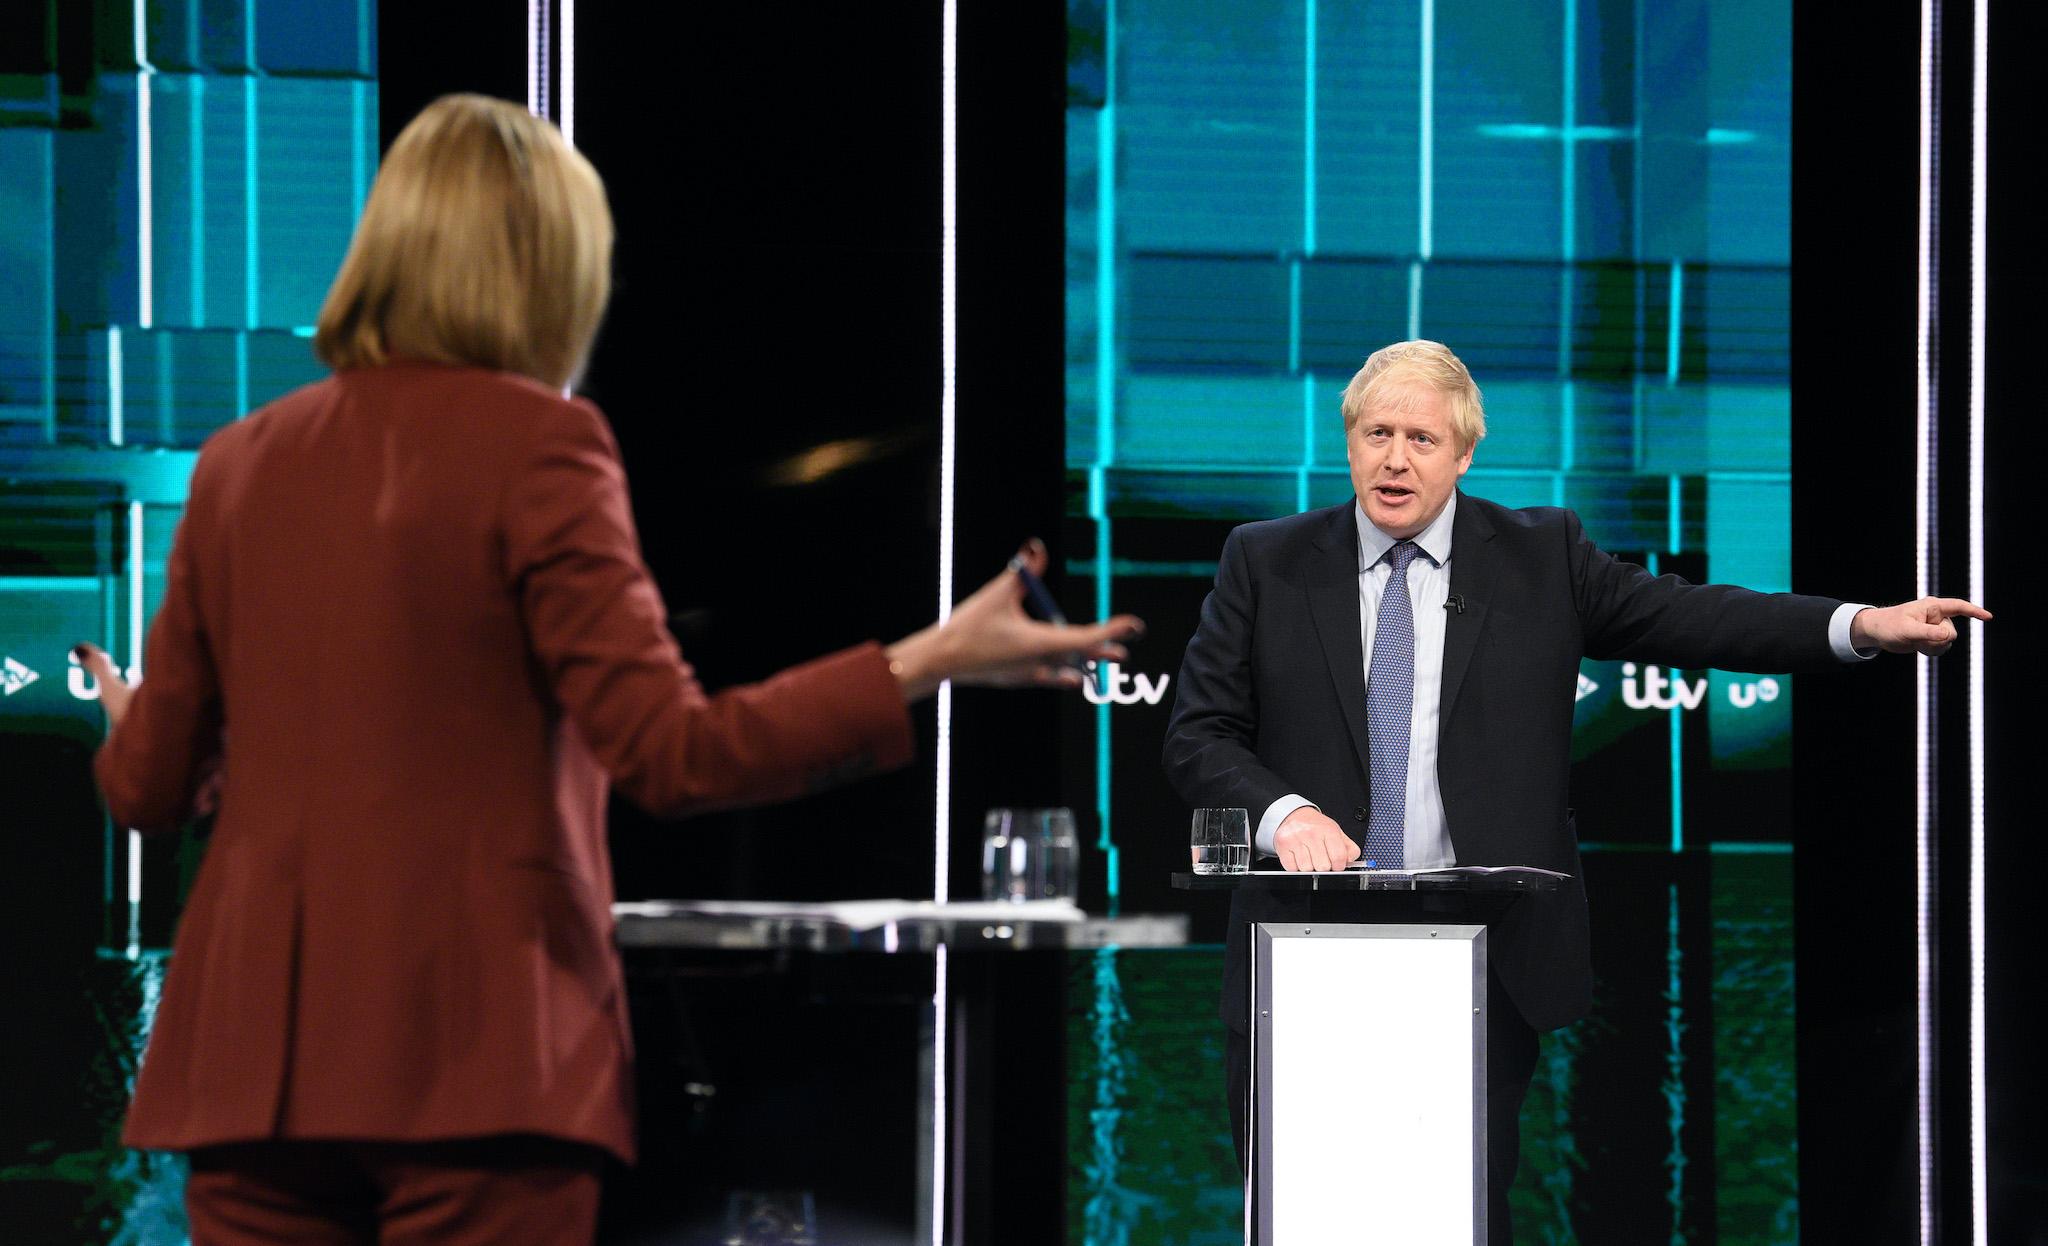 Johnson is far from the first prime minister to make wide-of-the-mark claims